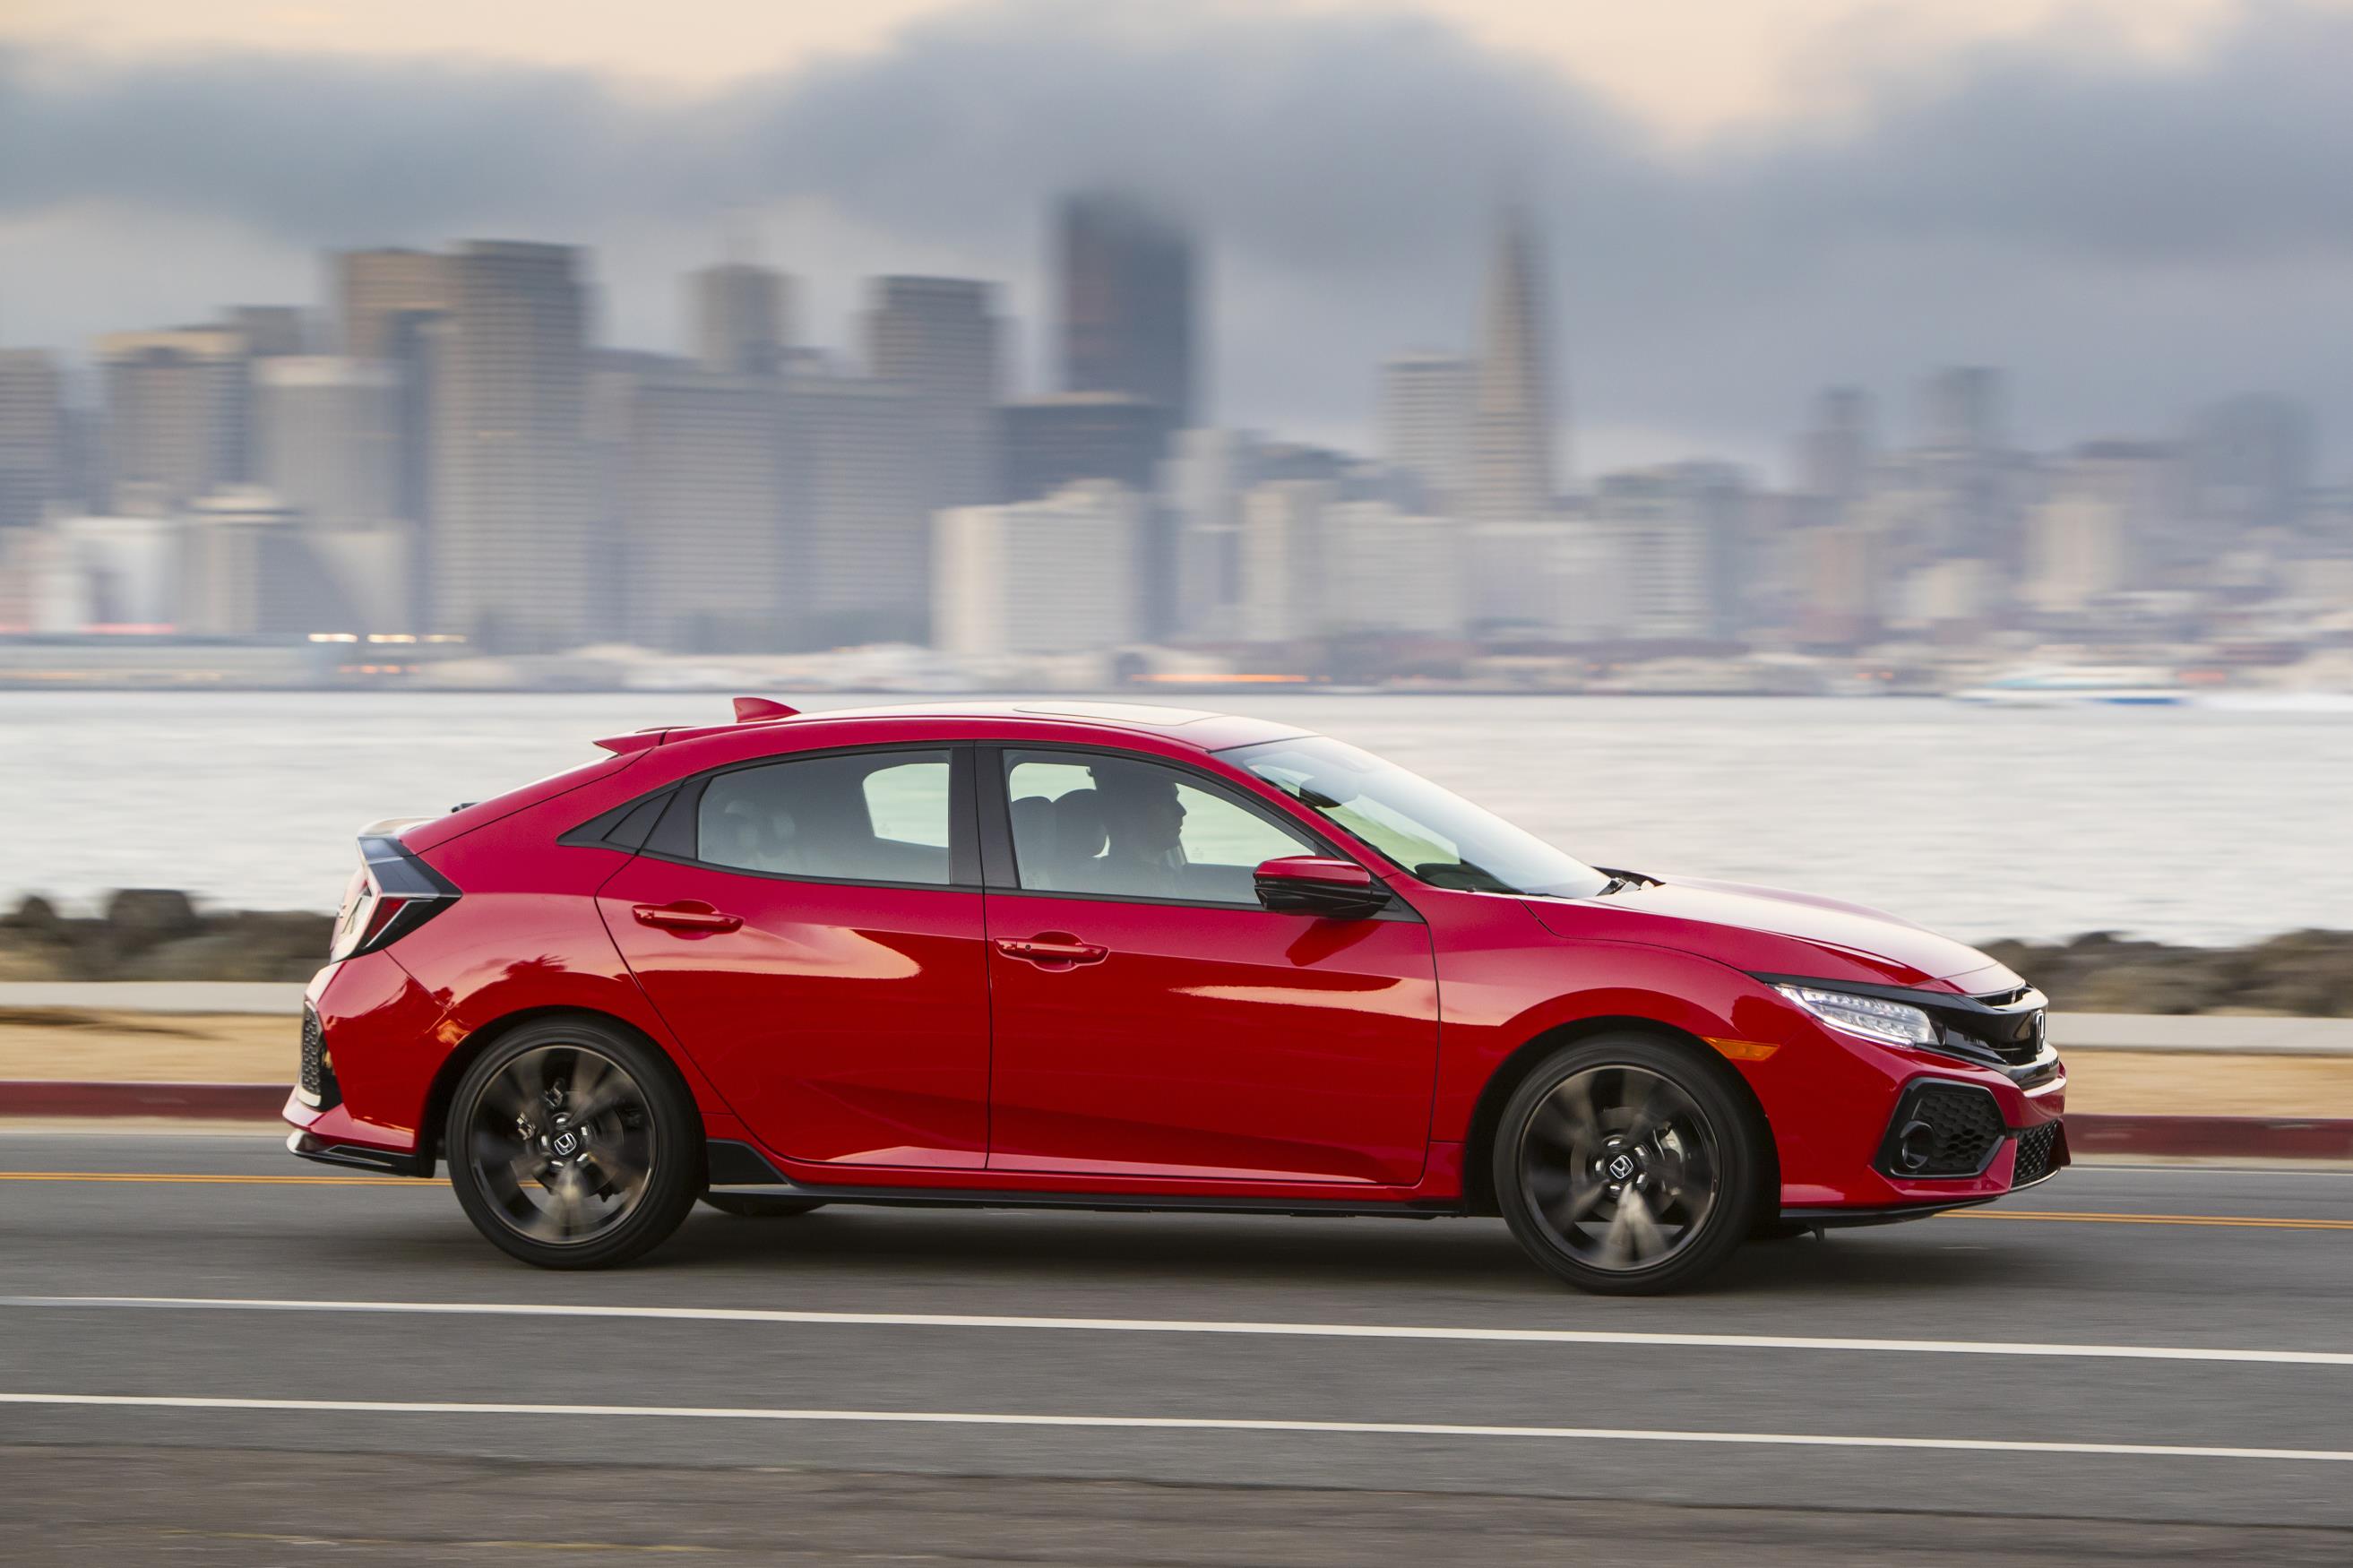 2017 Honda Civic Hatchback Arrives in America, Specs and Pricing